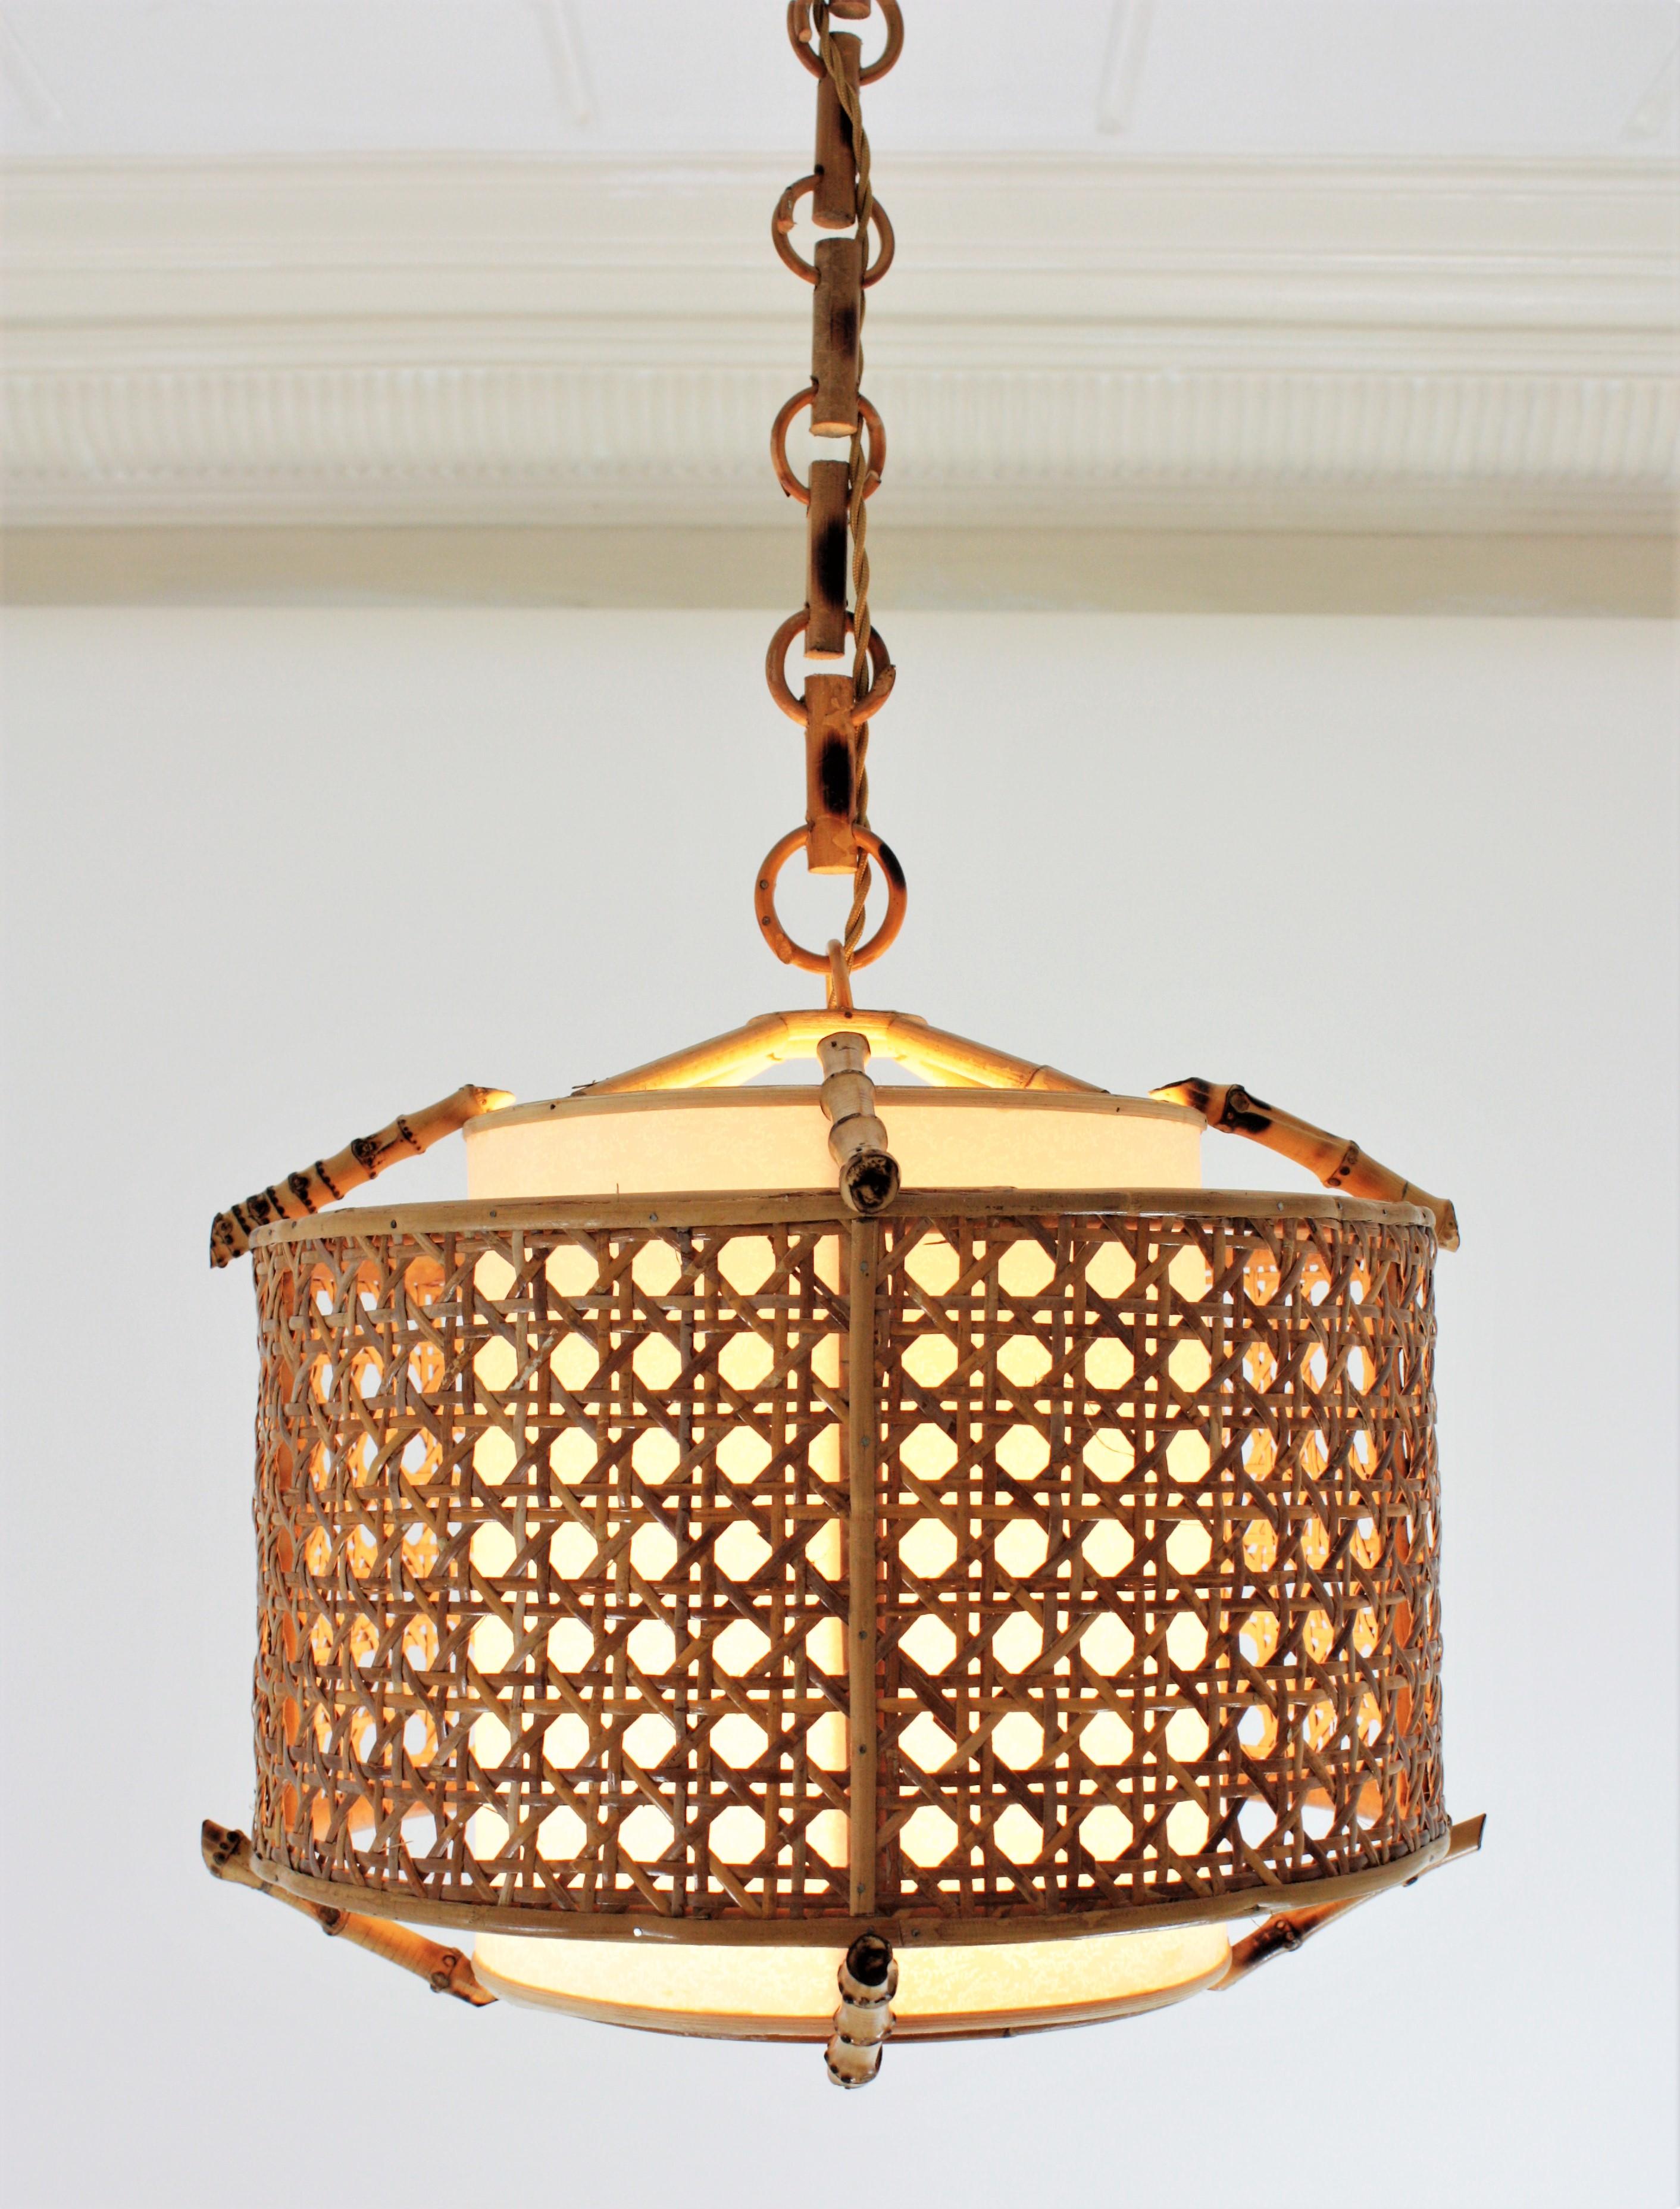 Spanish Bamboo Rattan and Wicker Weave Drum Pendant Lamp or Lantern with Tiki Accents